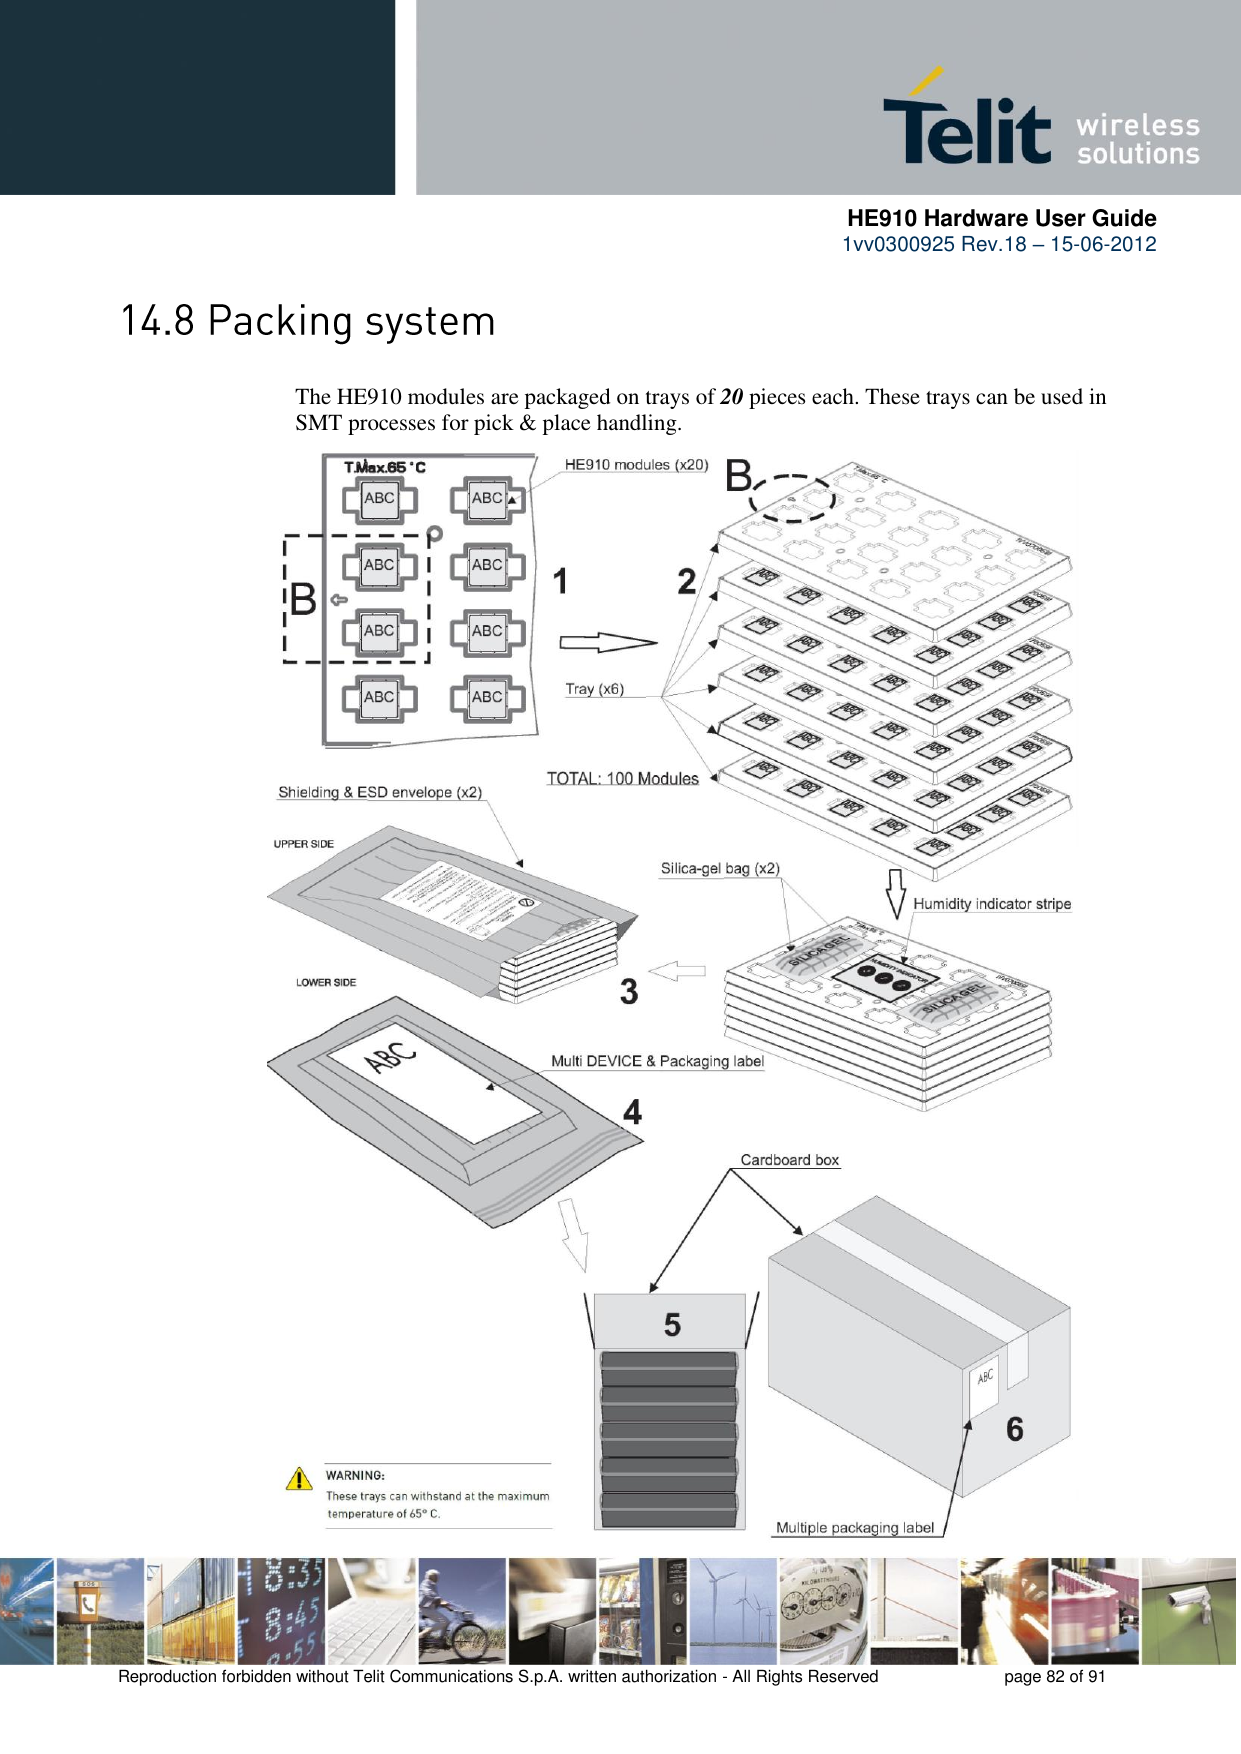      HE910 Hardware User Guide 1vv0300925 Rev.18 – 15-06-2012    Reproduction forbidden without Telit Communications S.p.A. written authorization - All Rights Reserved    page 82 of 91   The HE910 modules are packaged on trays of 20 pieces each. These trays can be used in SMT processes for pick &amp; place handling.                                           